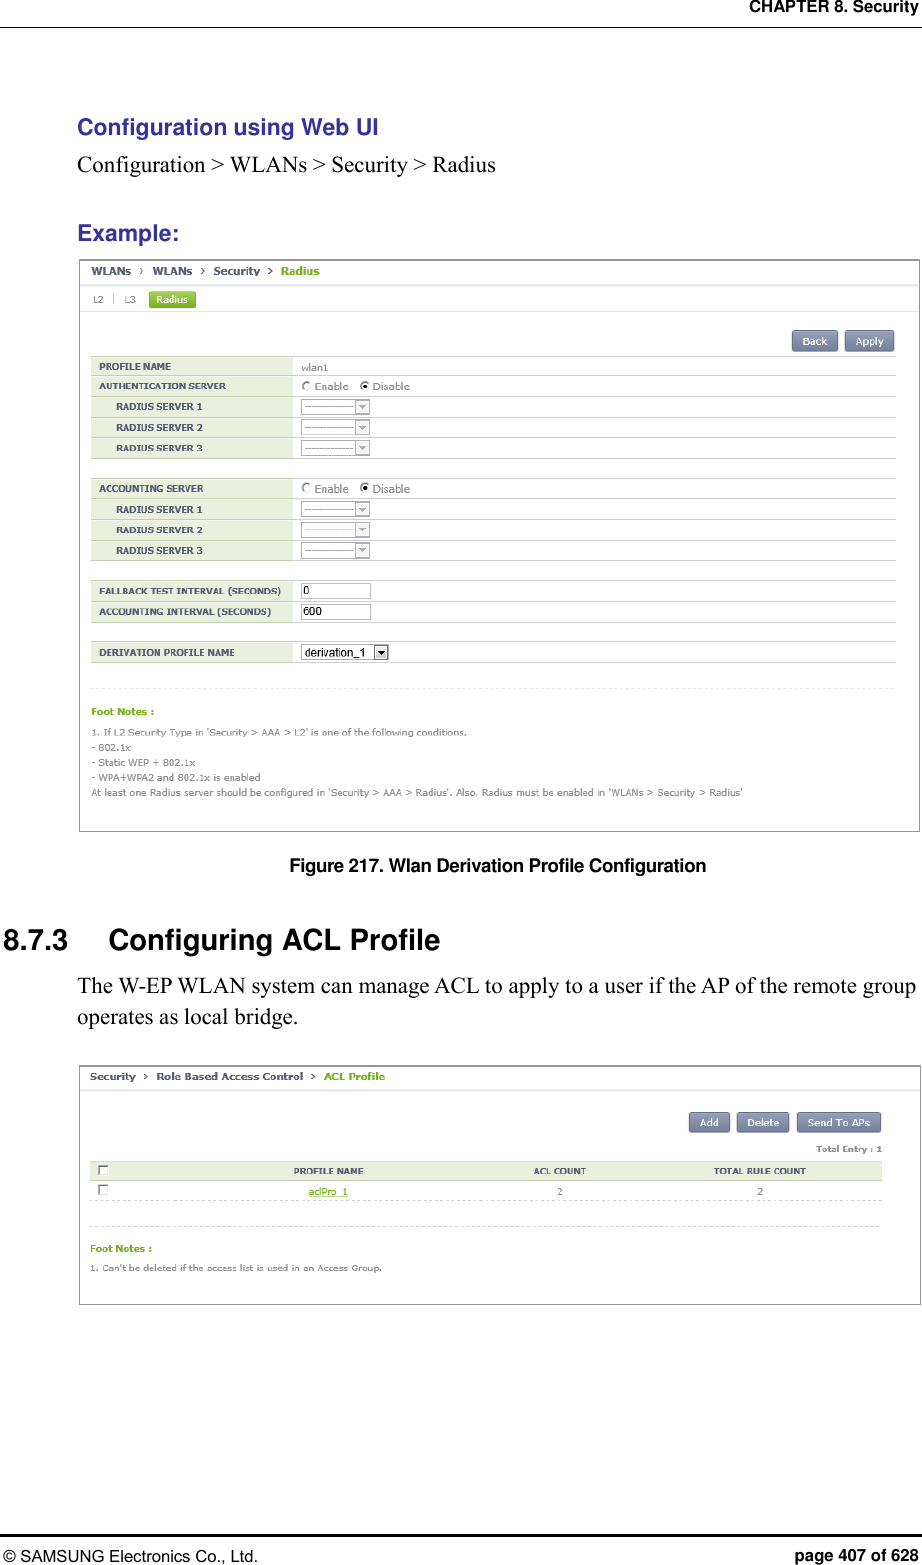 CHAPTER 8. Security © SAMSUNG Electronics Co., Ltd.  page 407 of 628 Configuration using Web UI Configuration &gt; WLANs &gt; Security &gt; Radius  Example: Figure 217. Wlan Derivation Profile Configuration   8.7.3  Configuring ACL Profile The W-EP WLAN system can manage ACL to apply to a user if the AP of the remote group operates as local bridge.   